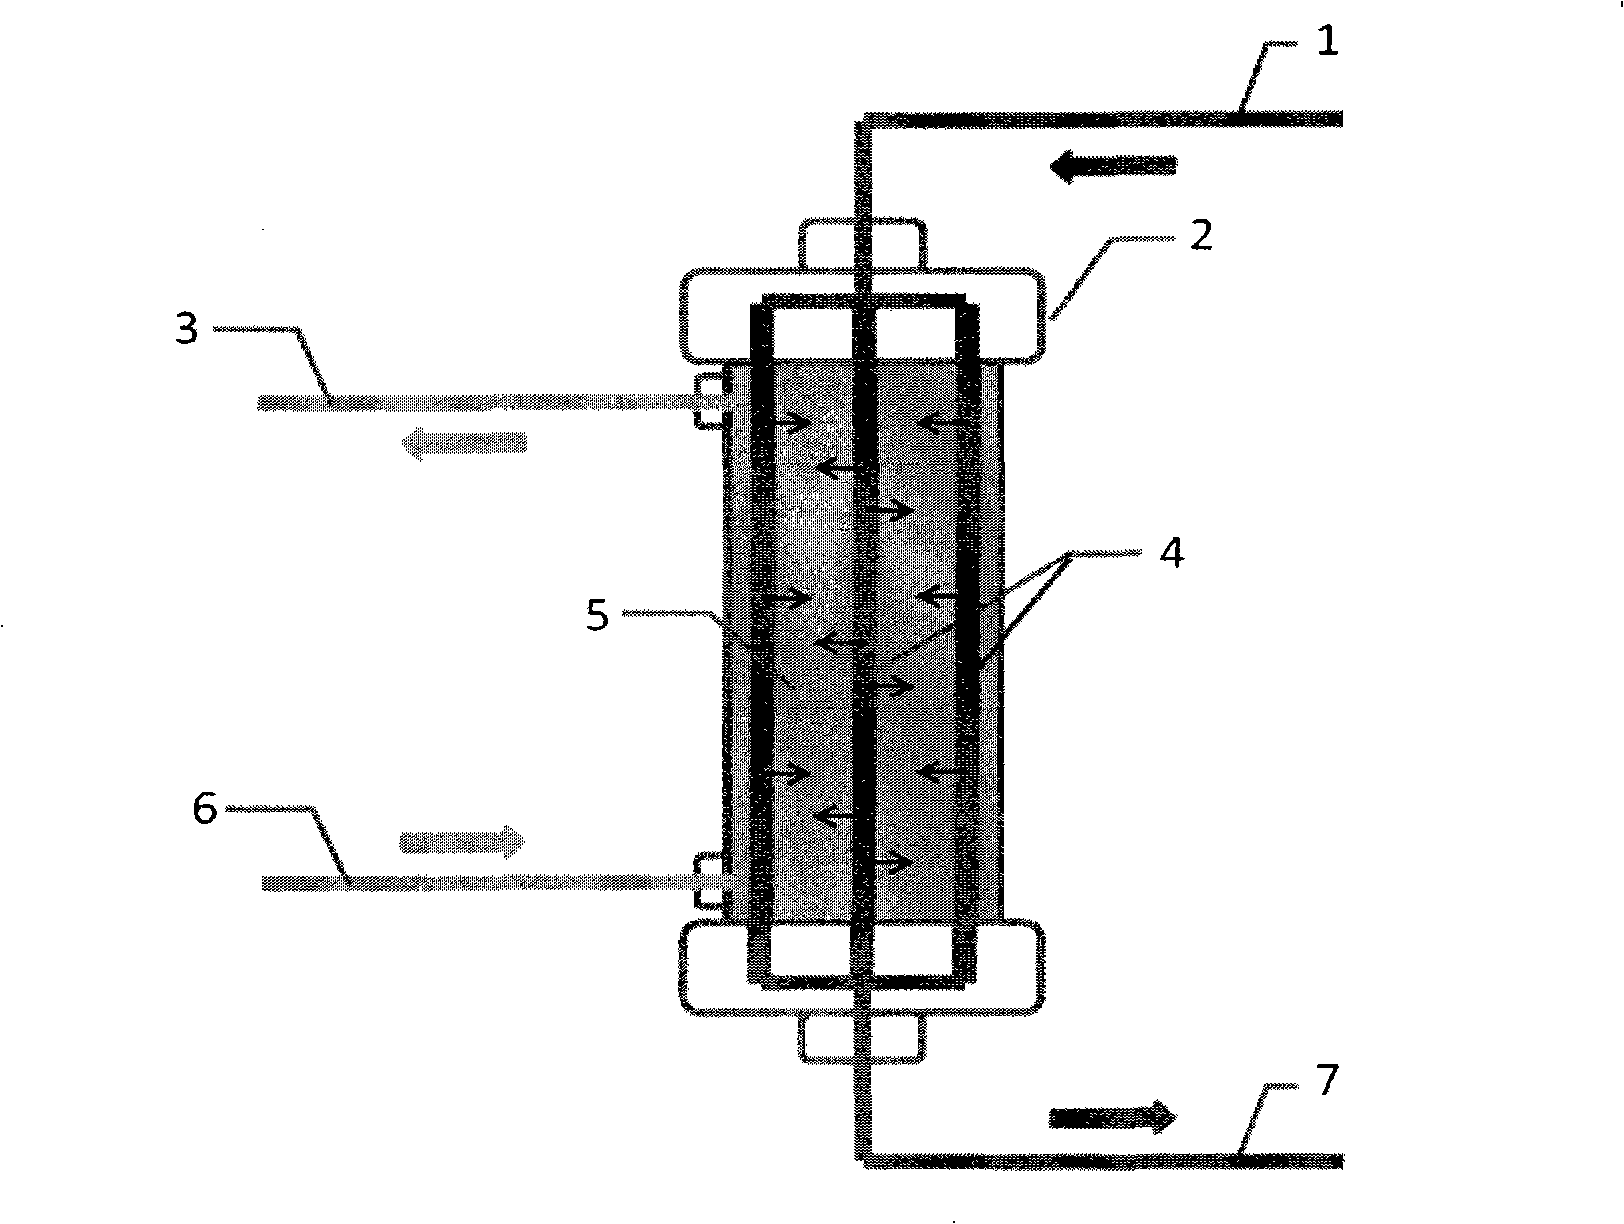 Water-soluble polymer adsorption material coupling cyclodextrin and uses thereof